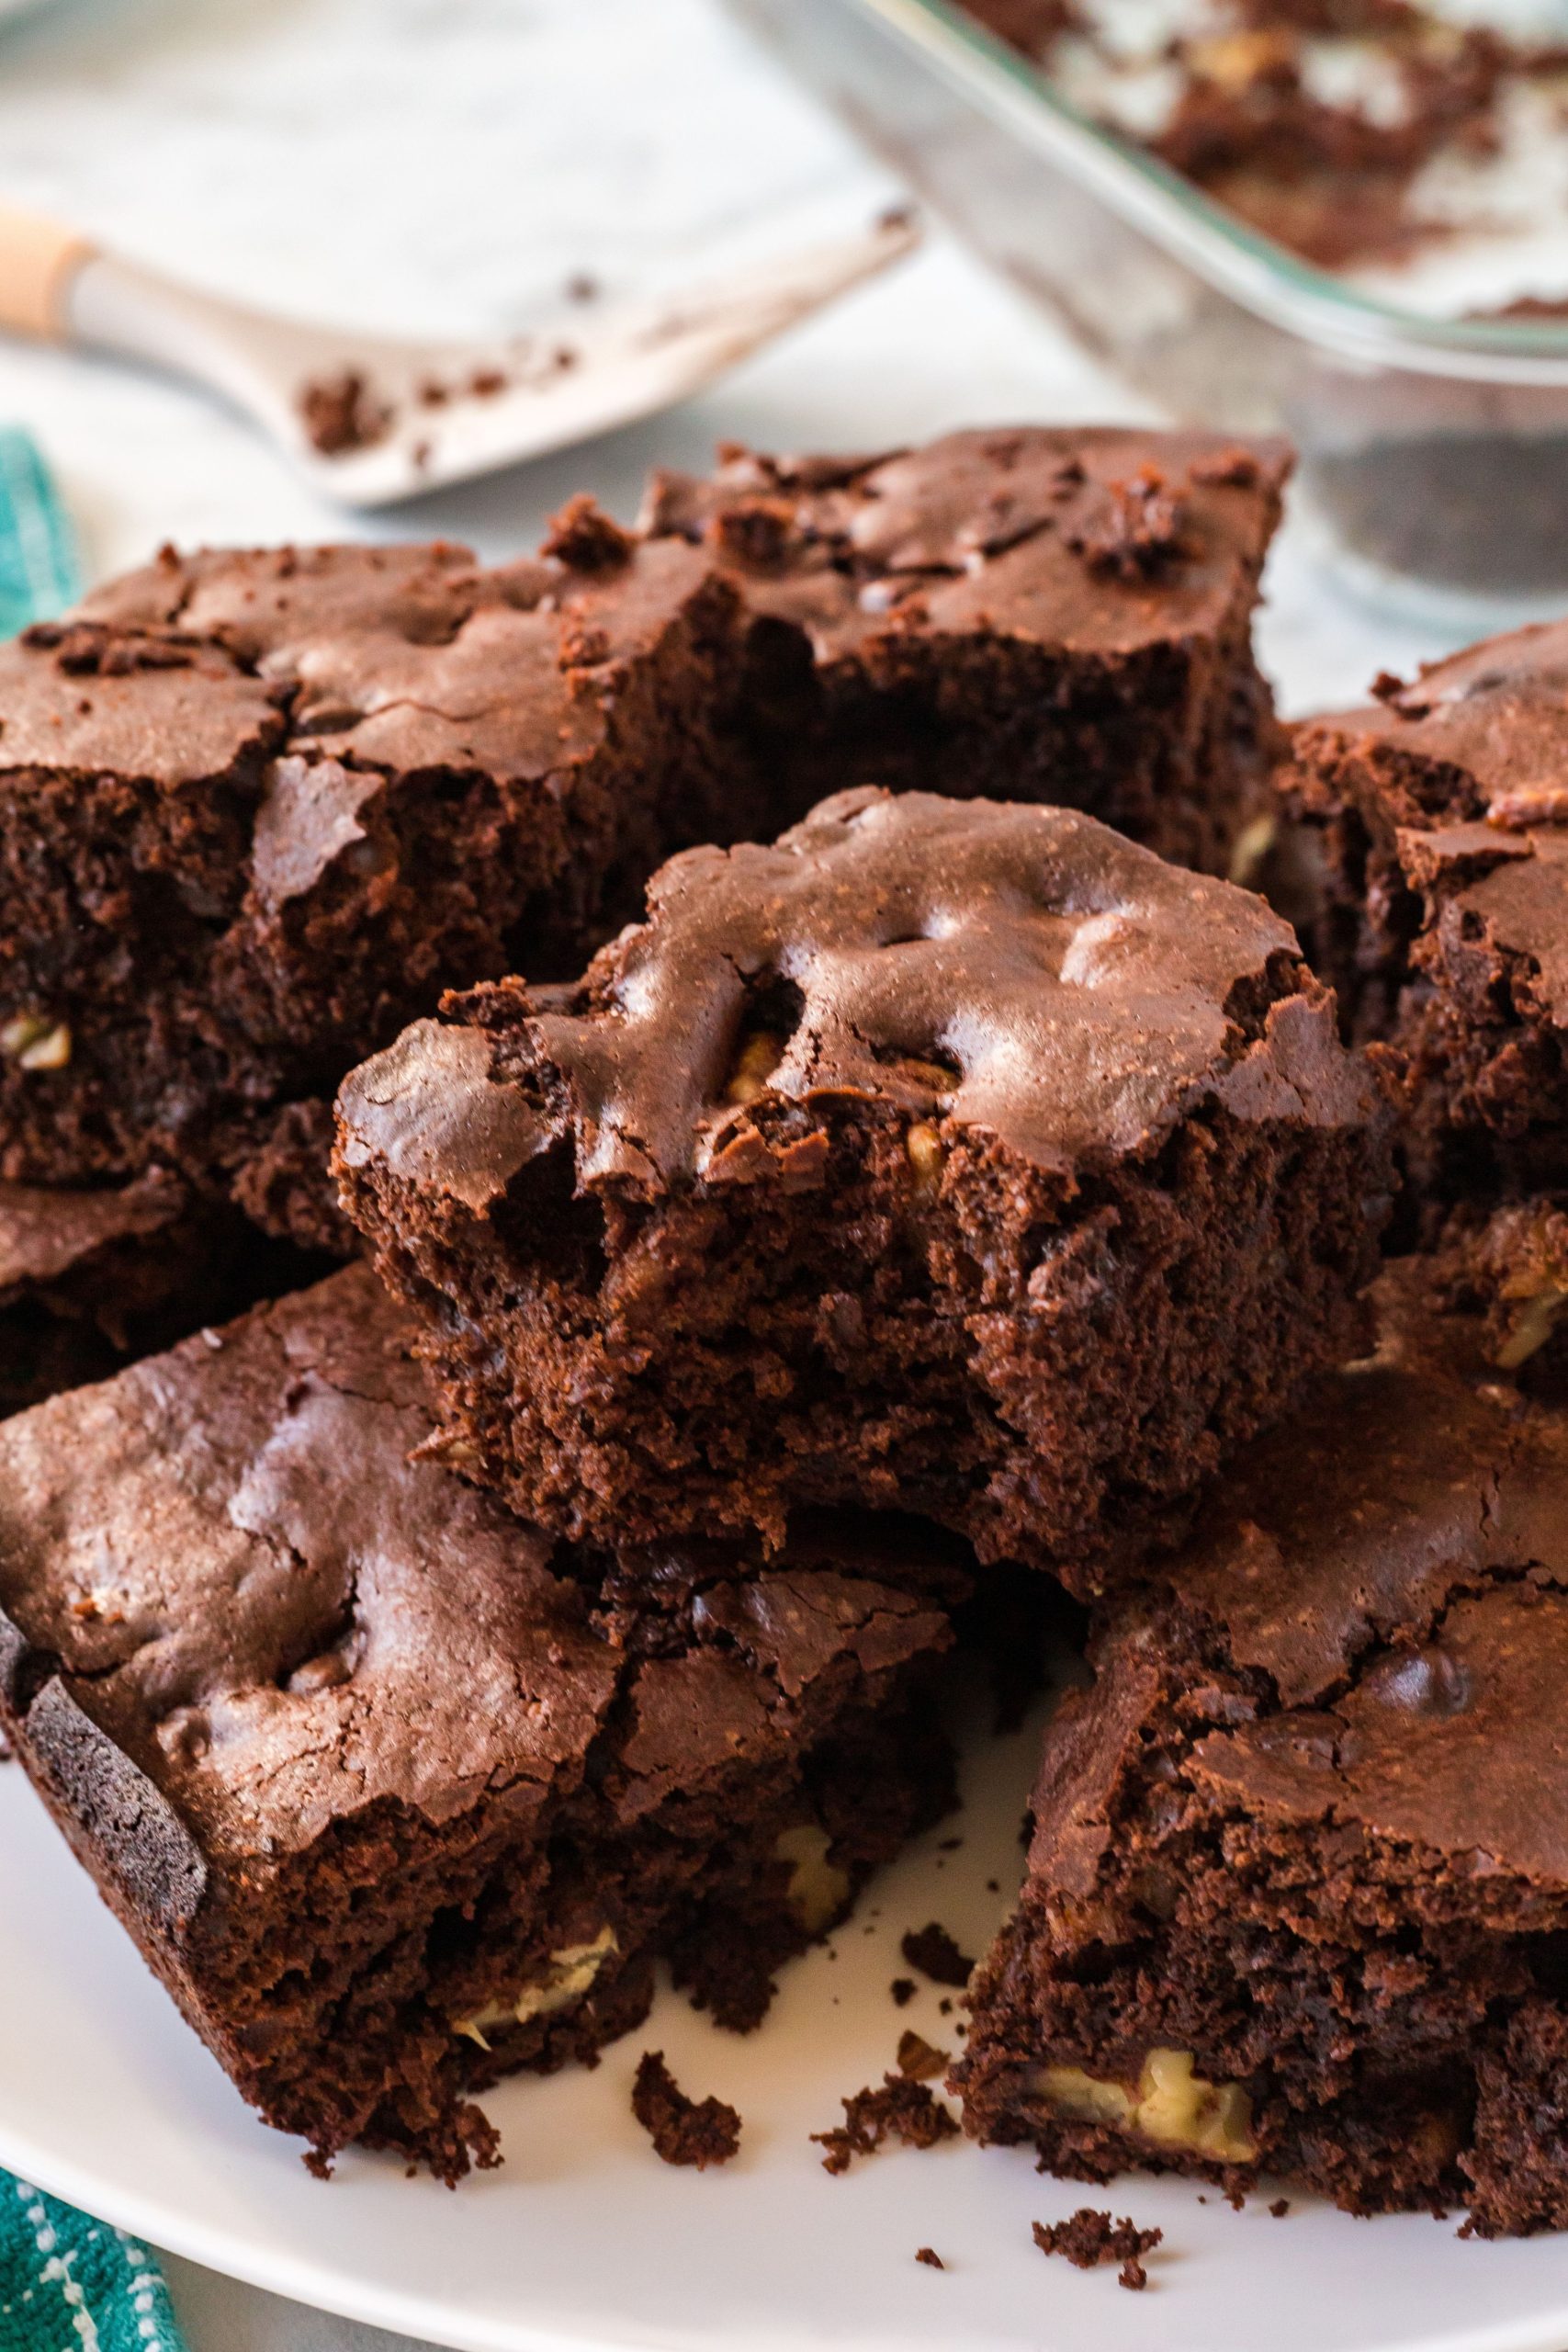 You're going to love the taste of this delicious Vegan Brownies recipe. They're moist and yummy and the result is a super Vegan Fudgy Brownie. End your dinner with this delicious vegan dessert that is certain to put a smile on your face.